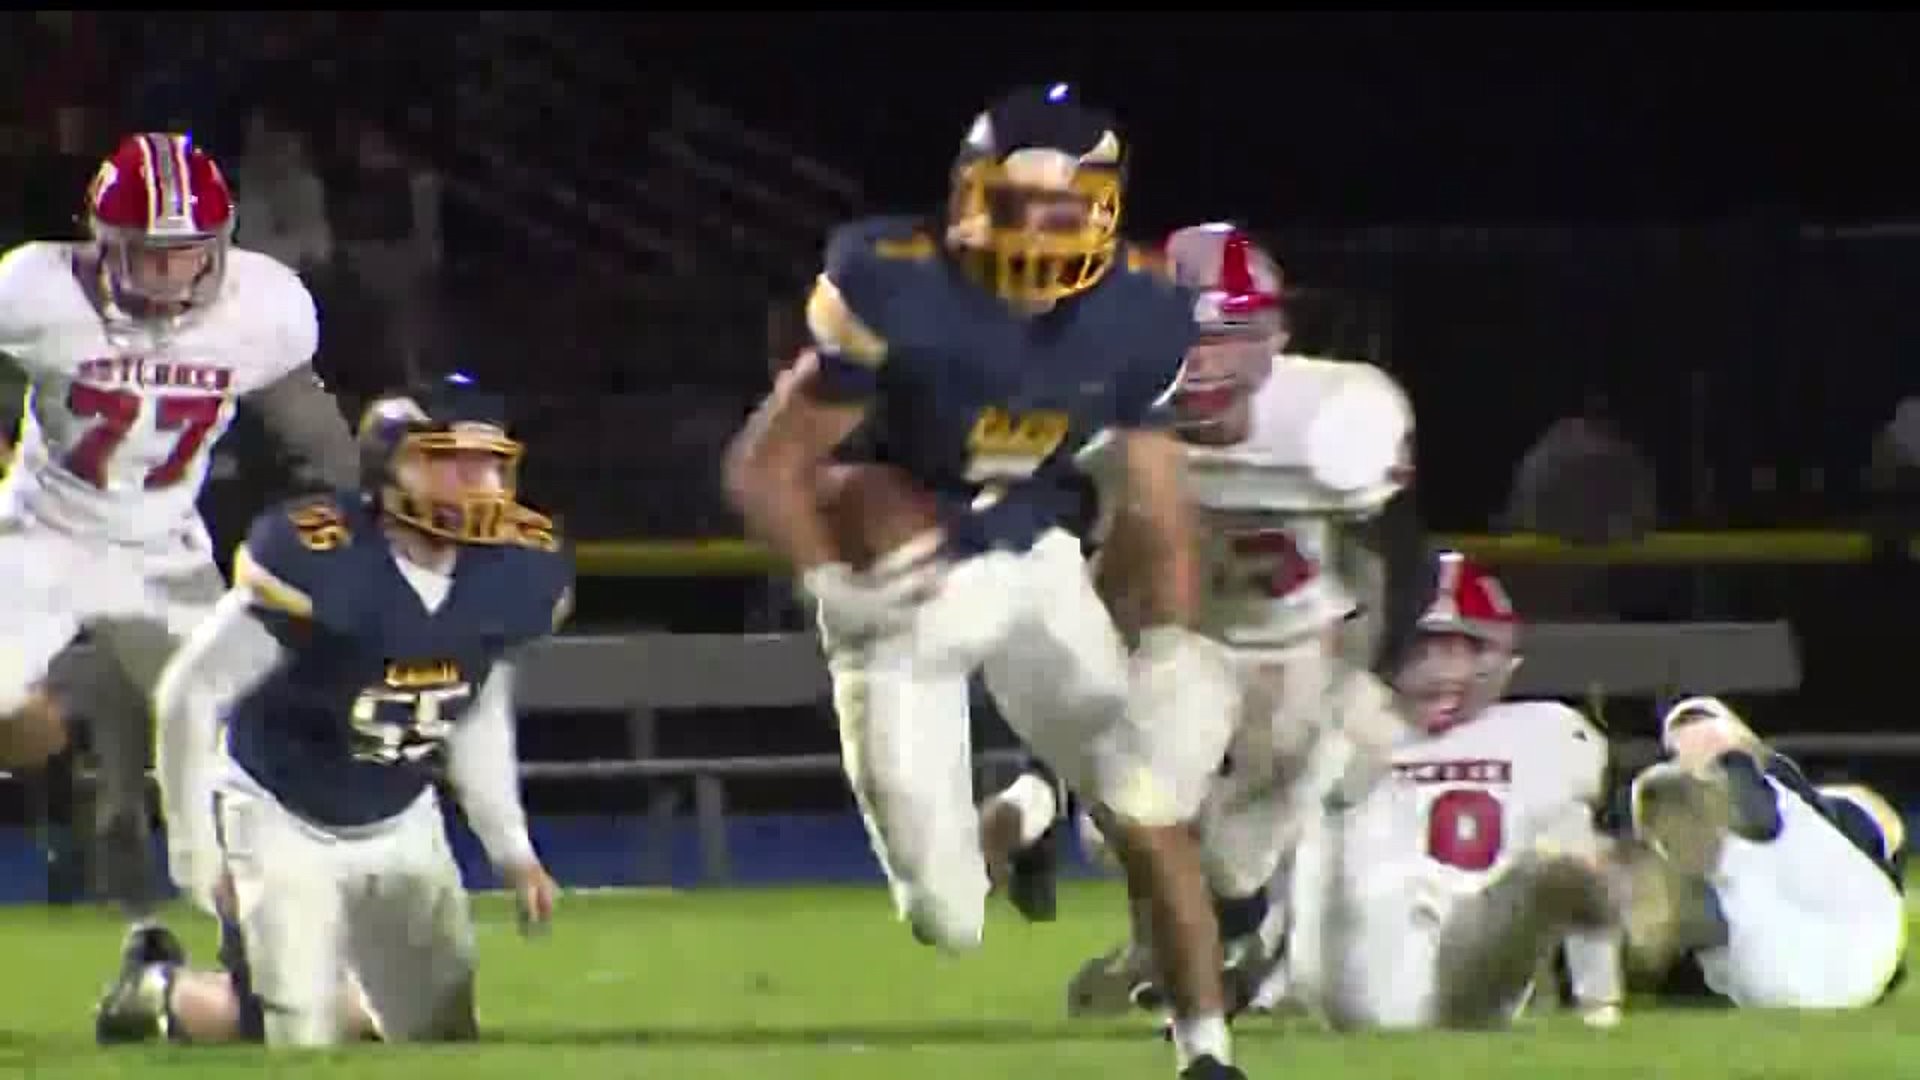 HSFF 2019 week 9 Annville-Cleona at Elco and Wilson and Cedar Crest highlights